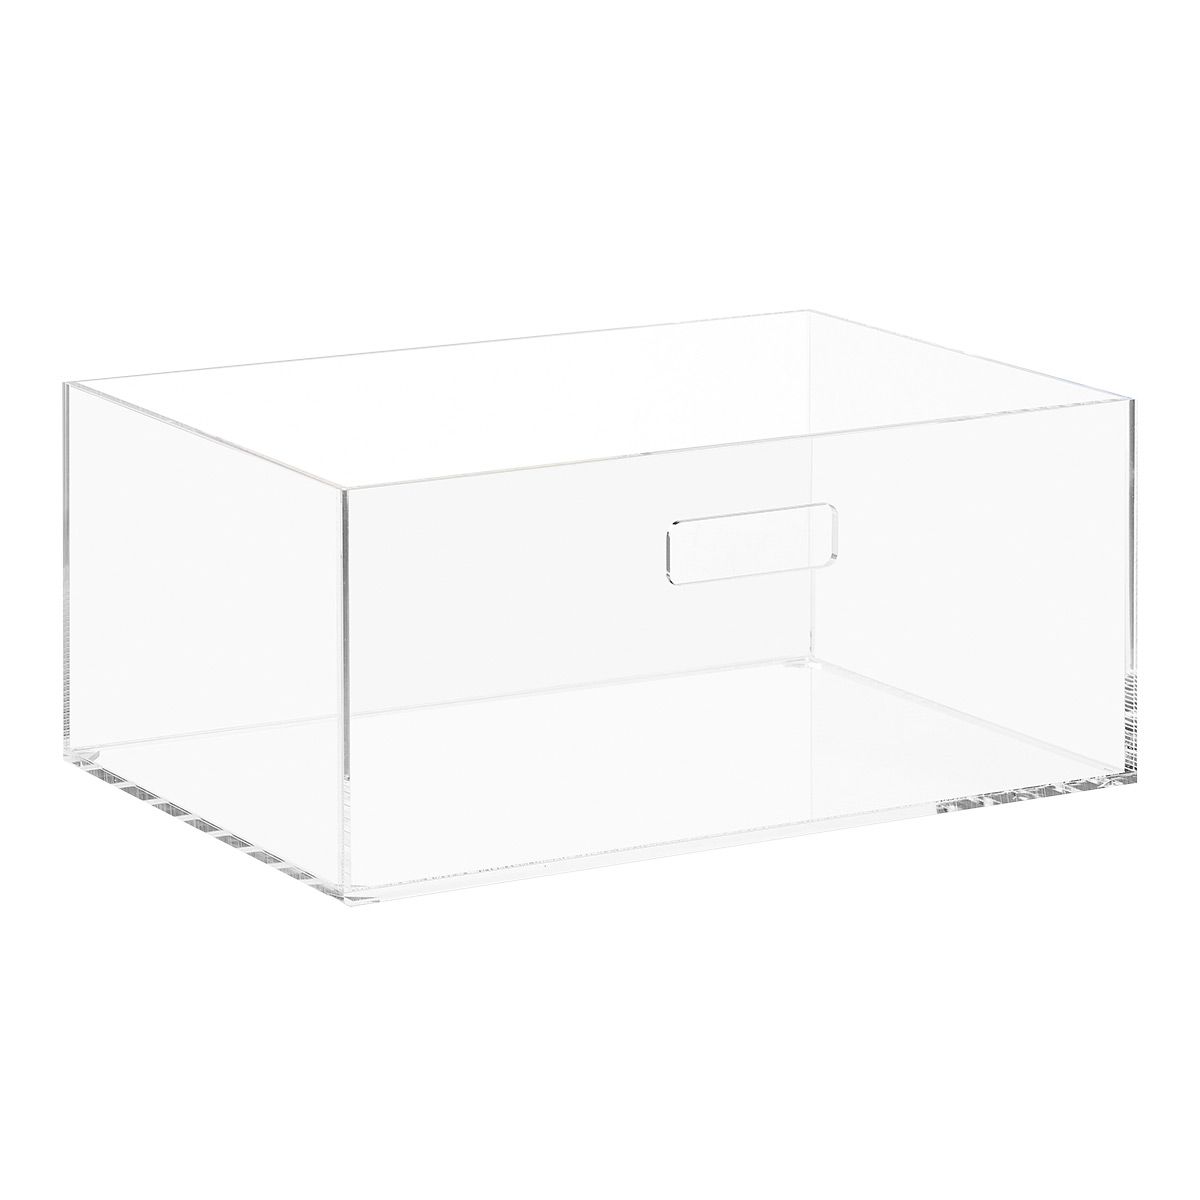 The Container Store Large Luxe Acrylic Bin ClearBy The Container Store0.0No Reviews$37.49/eaReg $... | The Container Store